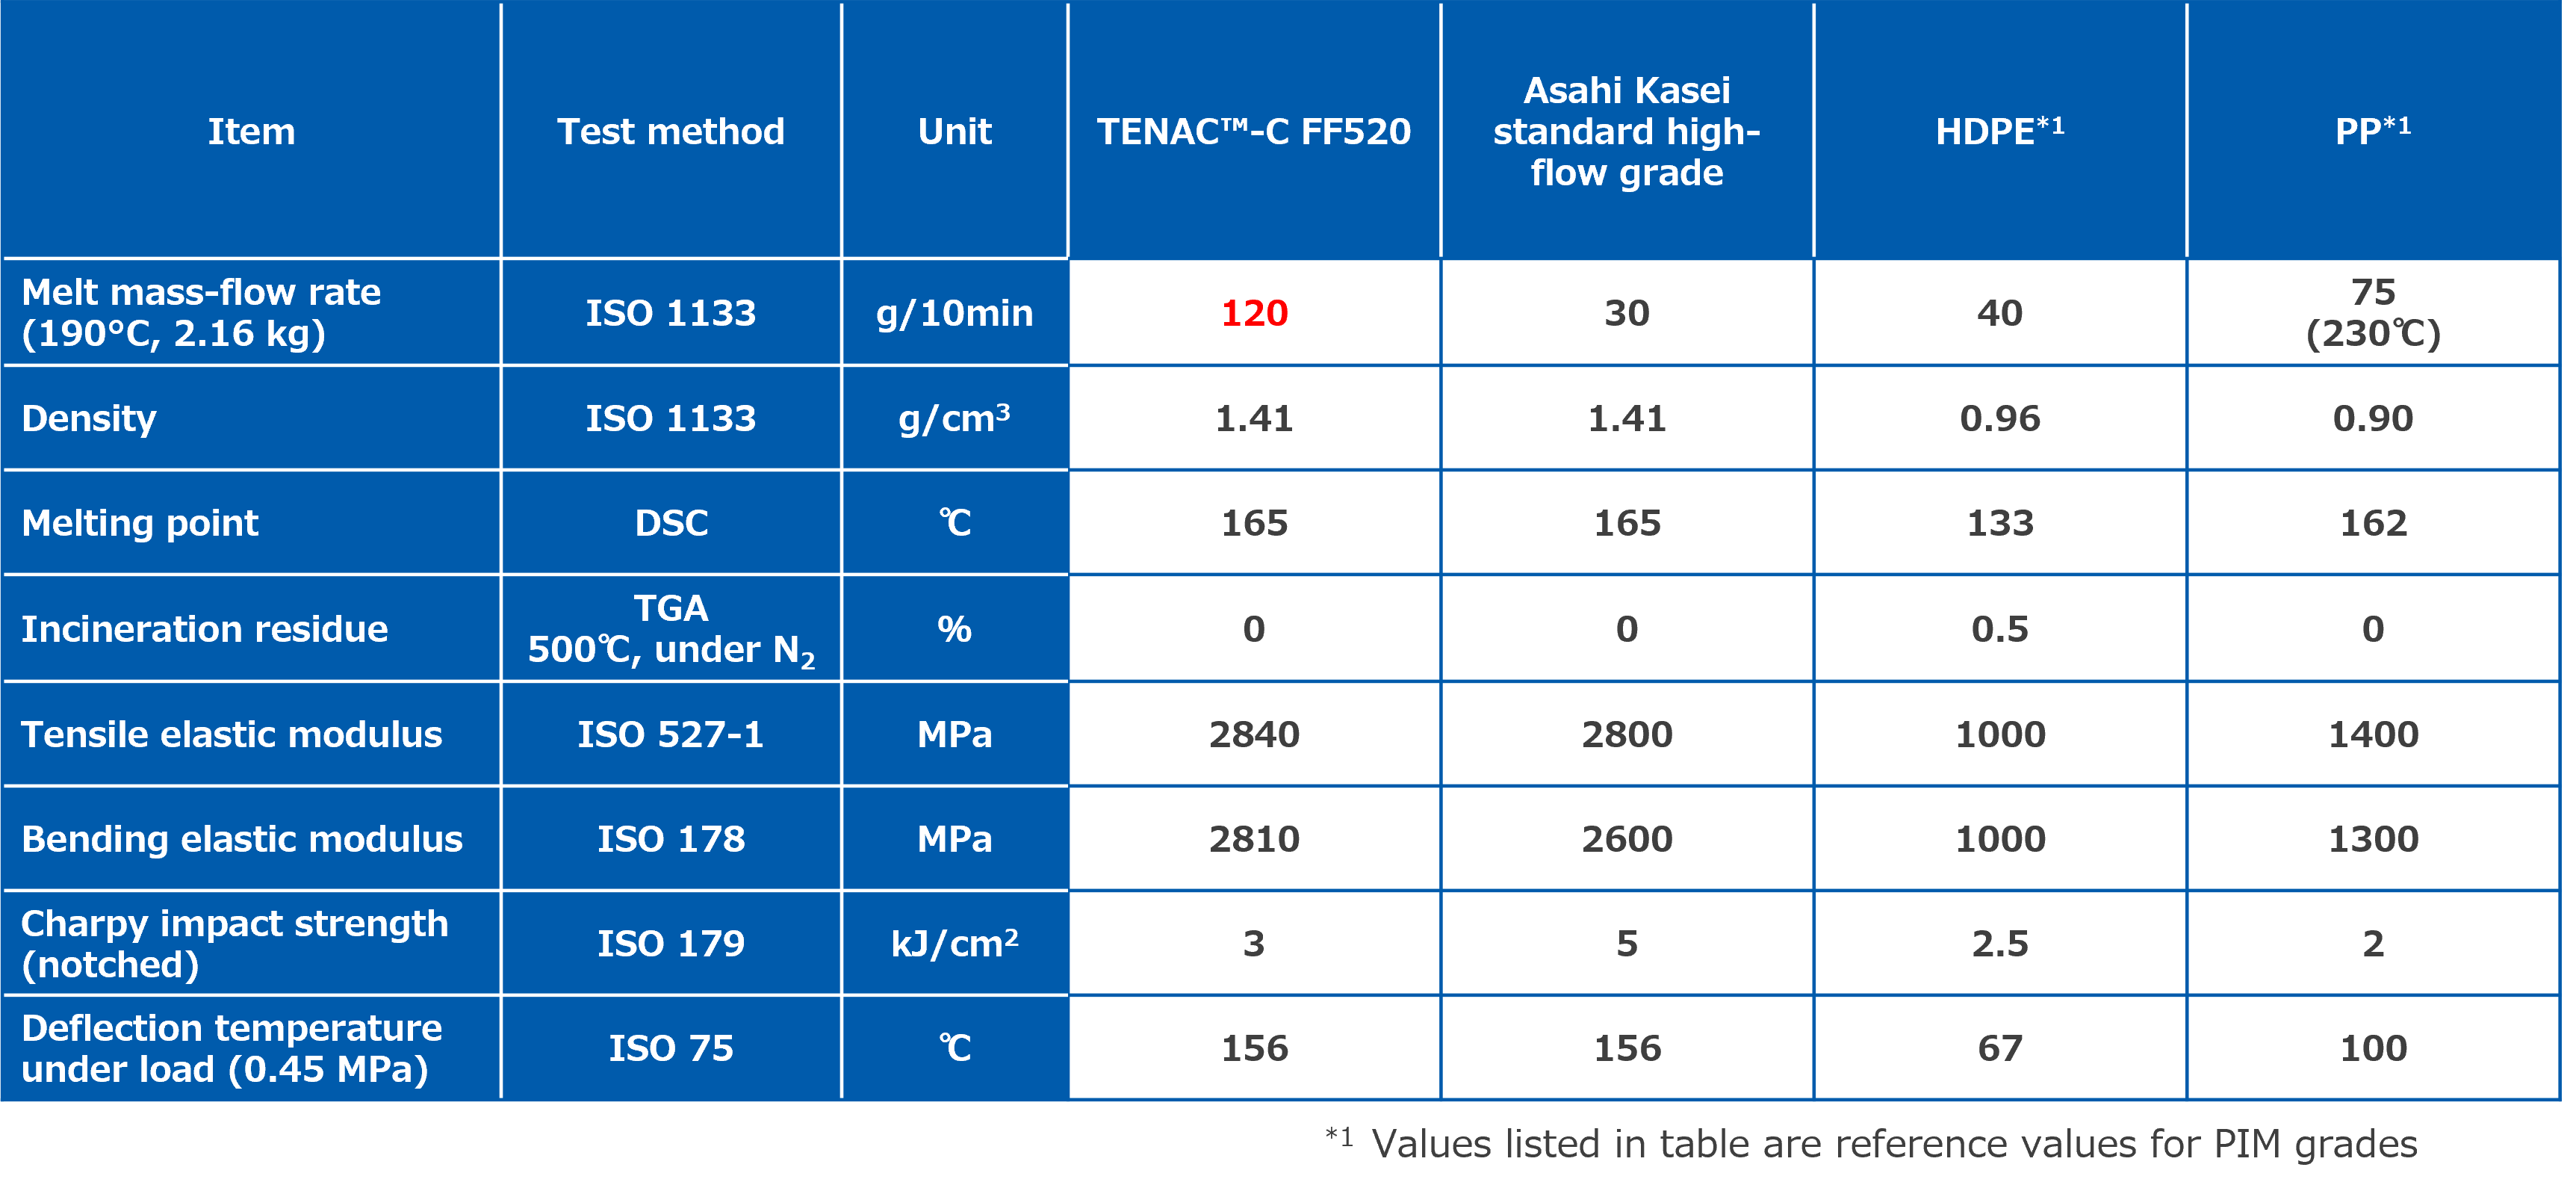 Comparison of TENAC-C FF520 properties vs. reference values for other resins used as PIM binders.